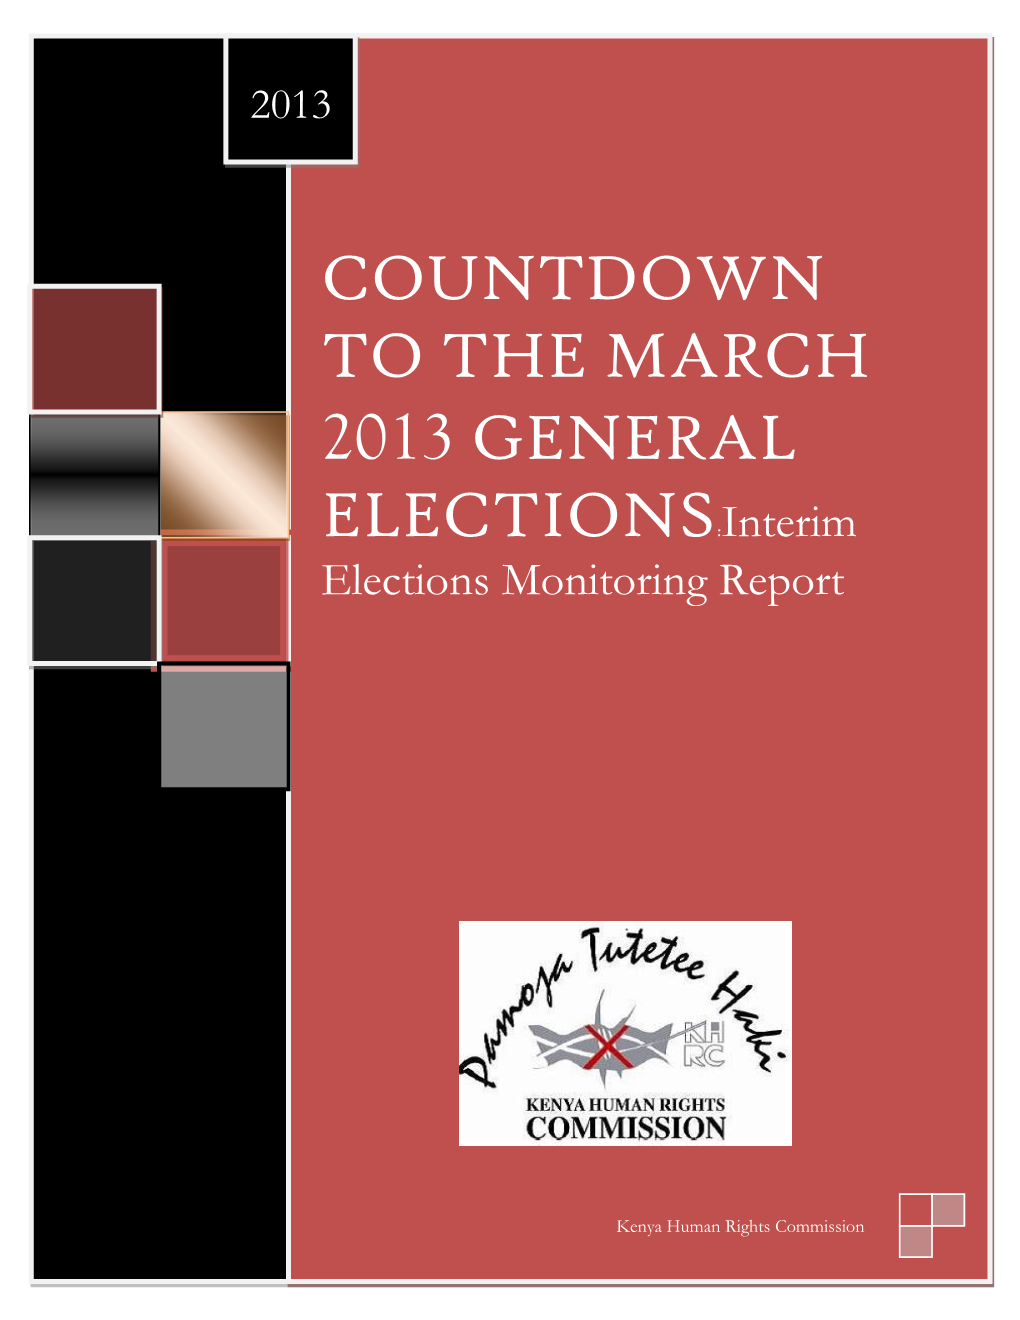 COUNTDOWN to the MARCH 2013 GENERAL ELECTIONS:Interim